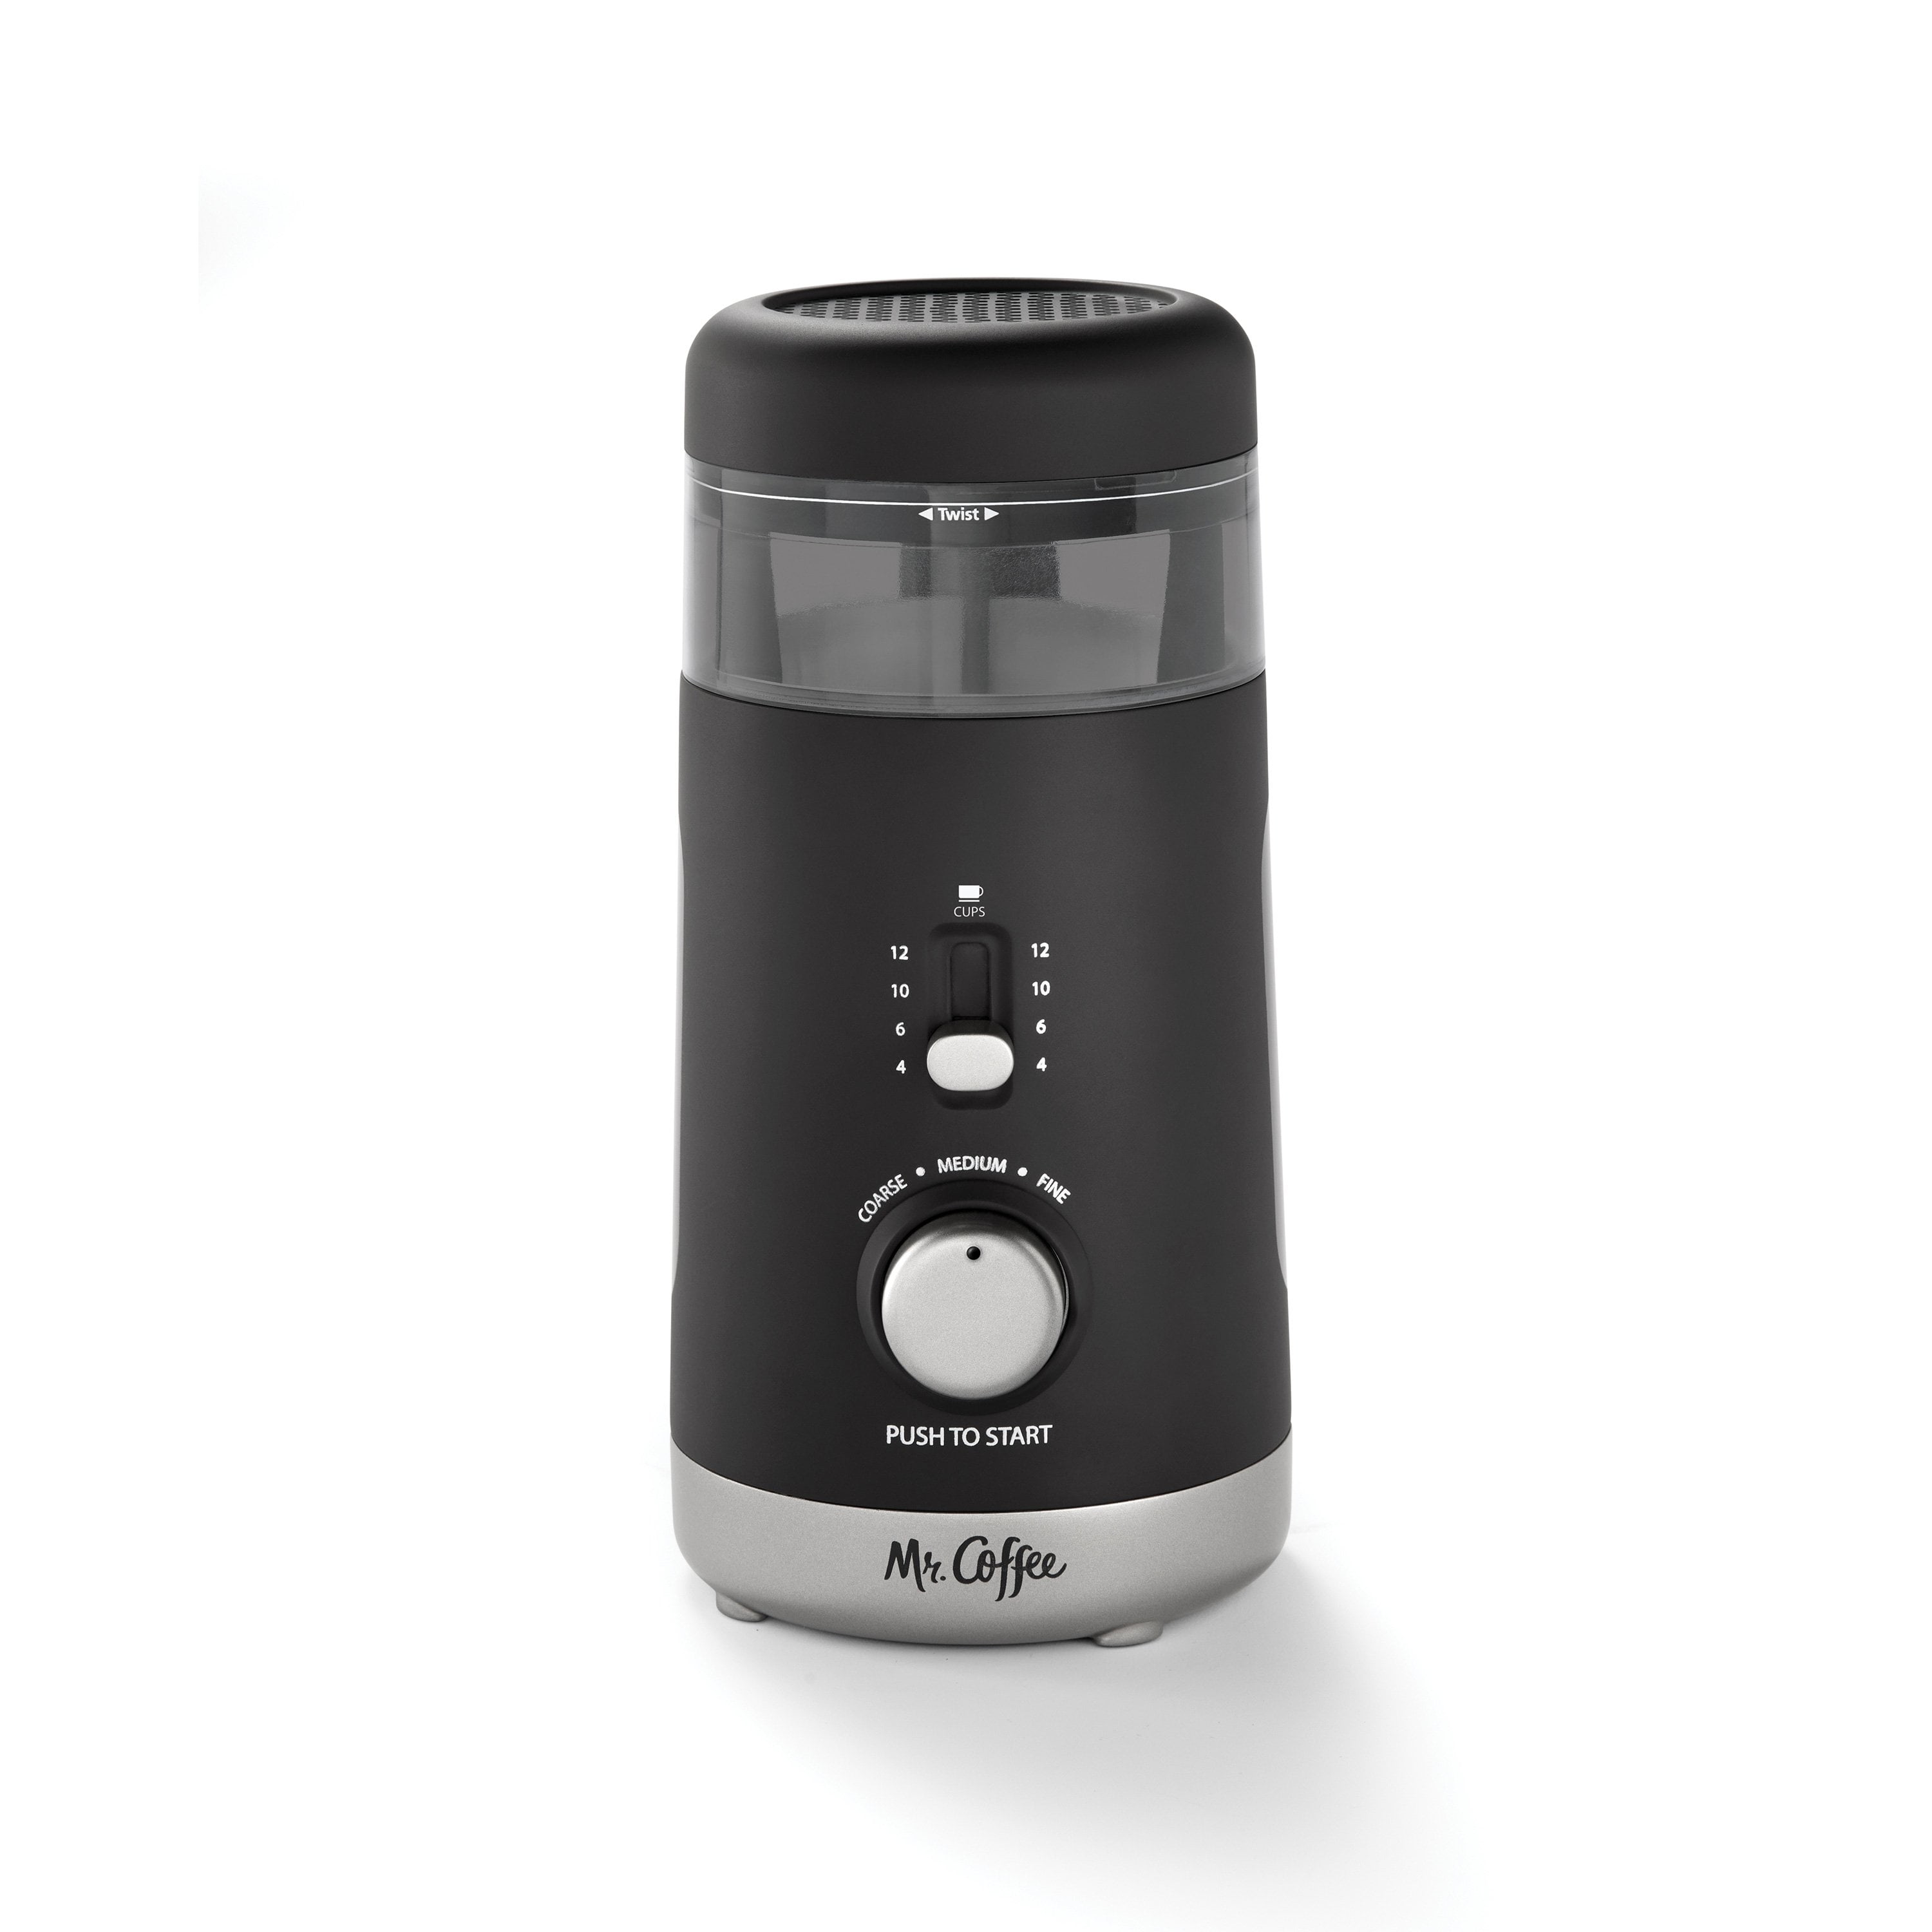  Mr. Coffee 12 Cup Electric Coffee Grinder with Multi Settings,  Black, 3 Speed - IDS77 : Home & Kitchen